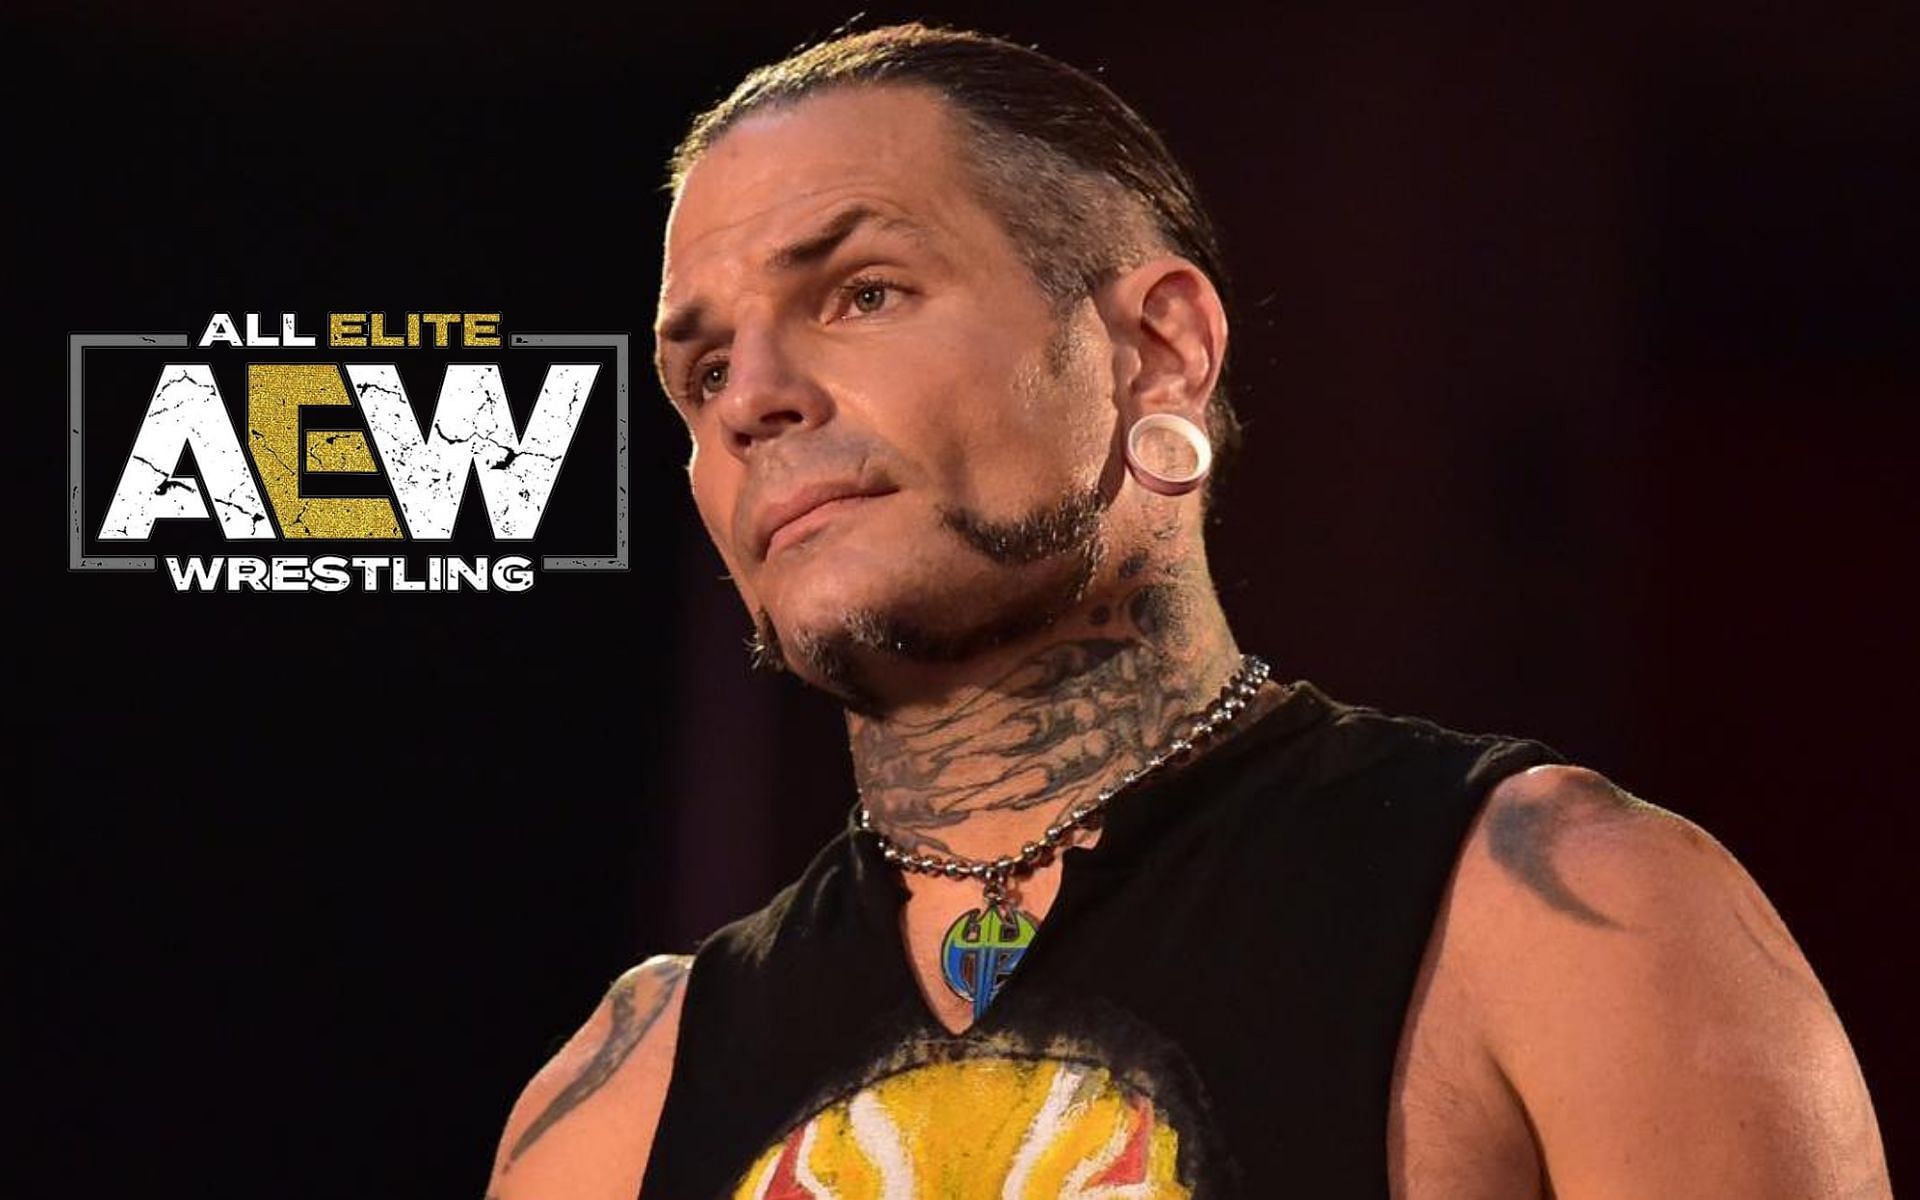 Jeff Hardy is still missing from AEW programming due to a suspension.